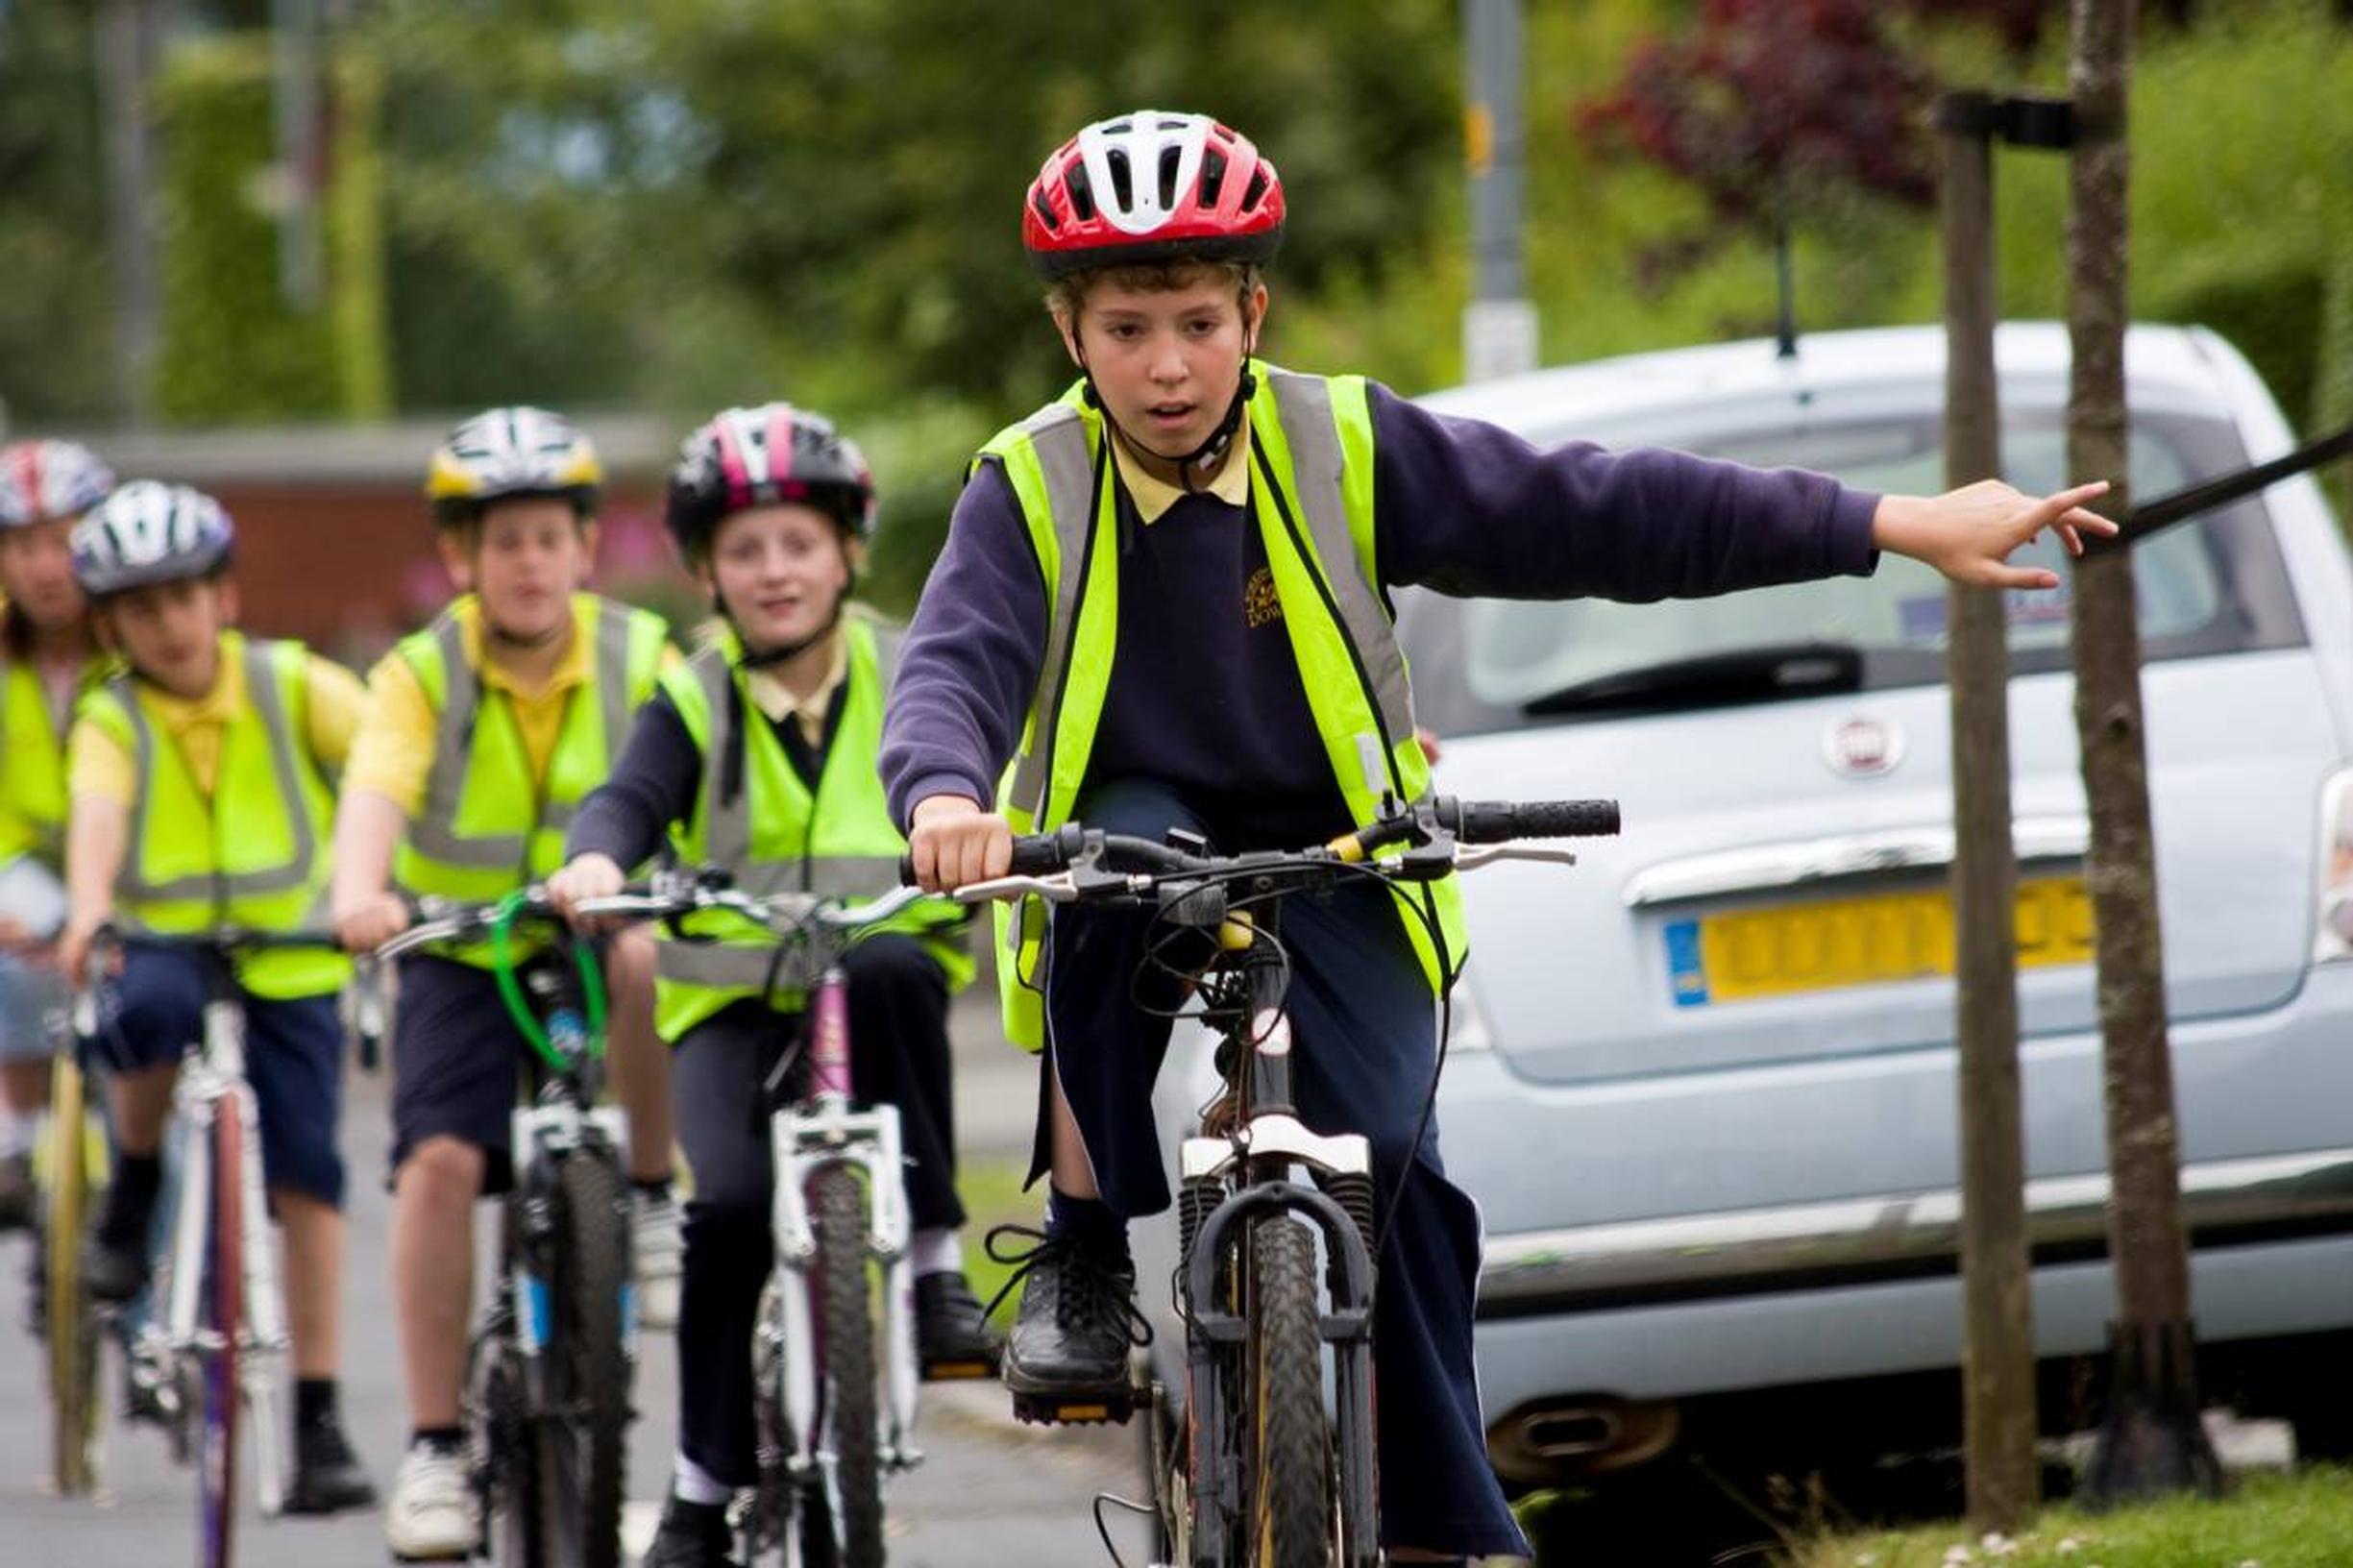 Training is the first step to ensure that adults and children have the confidence and competence to cycle